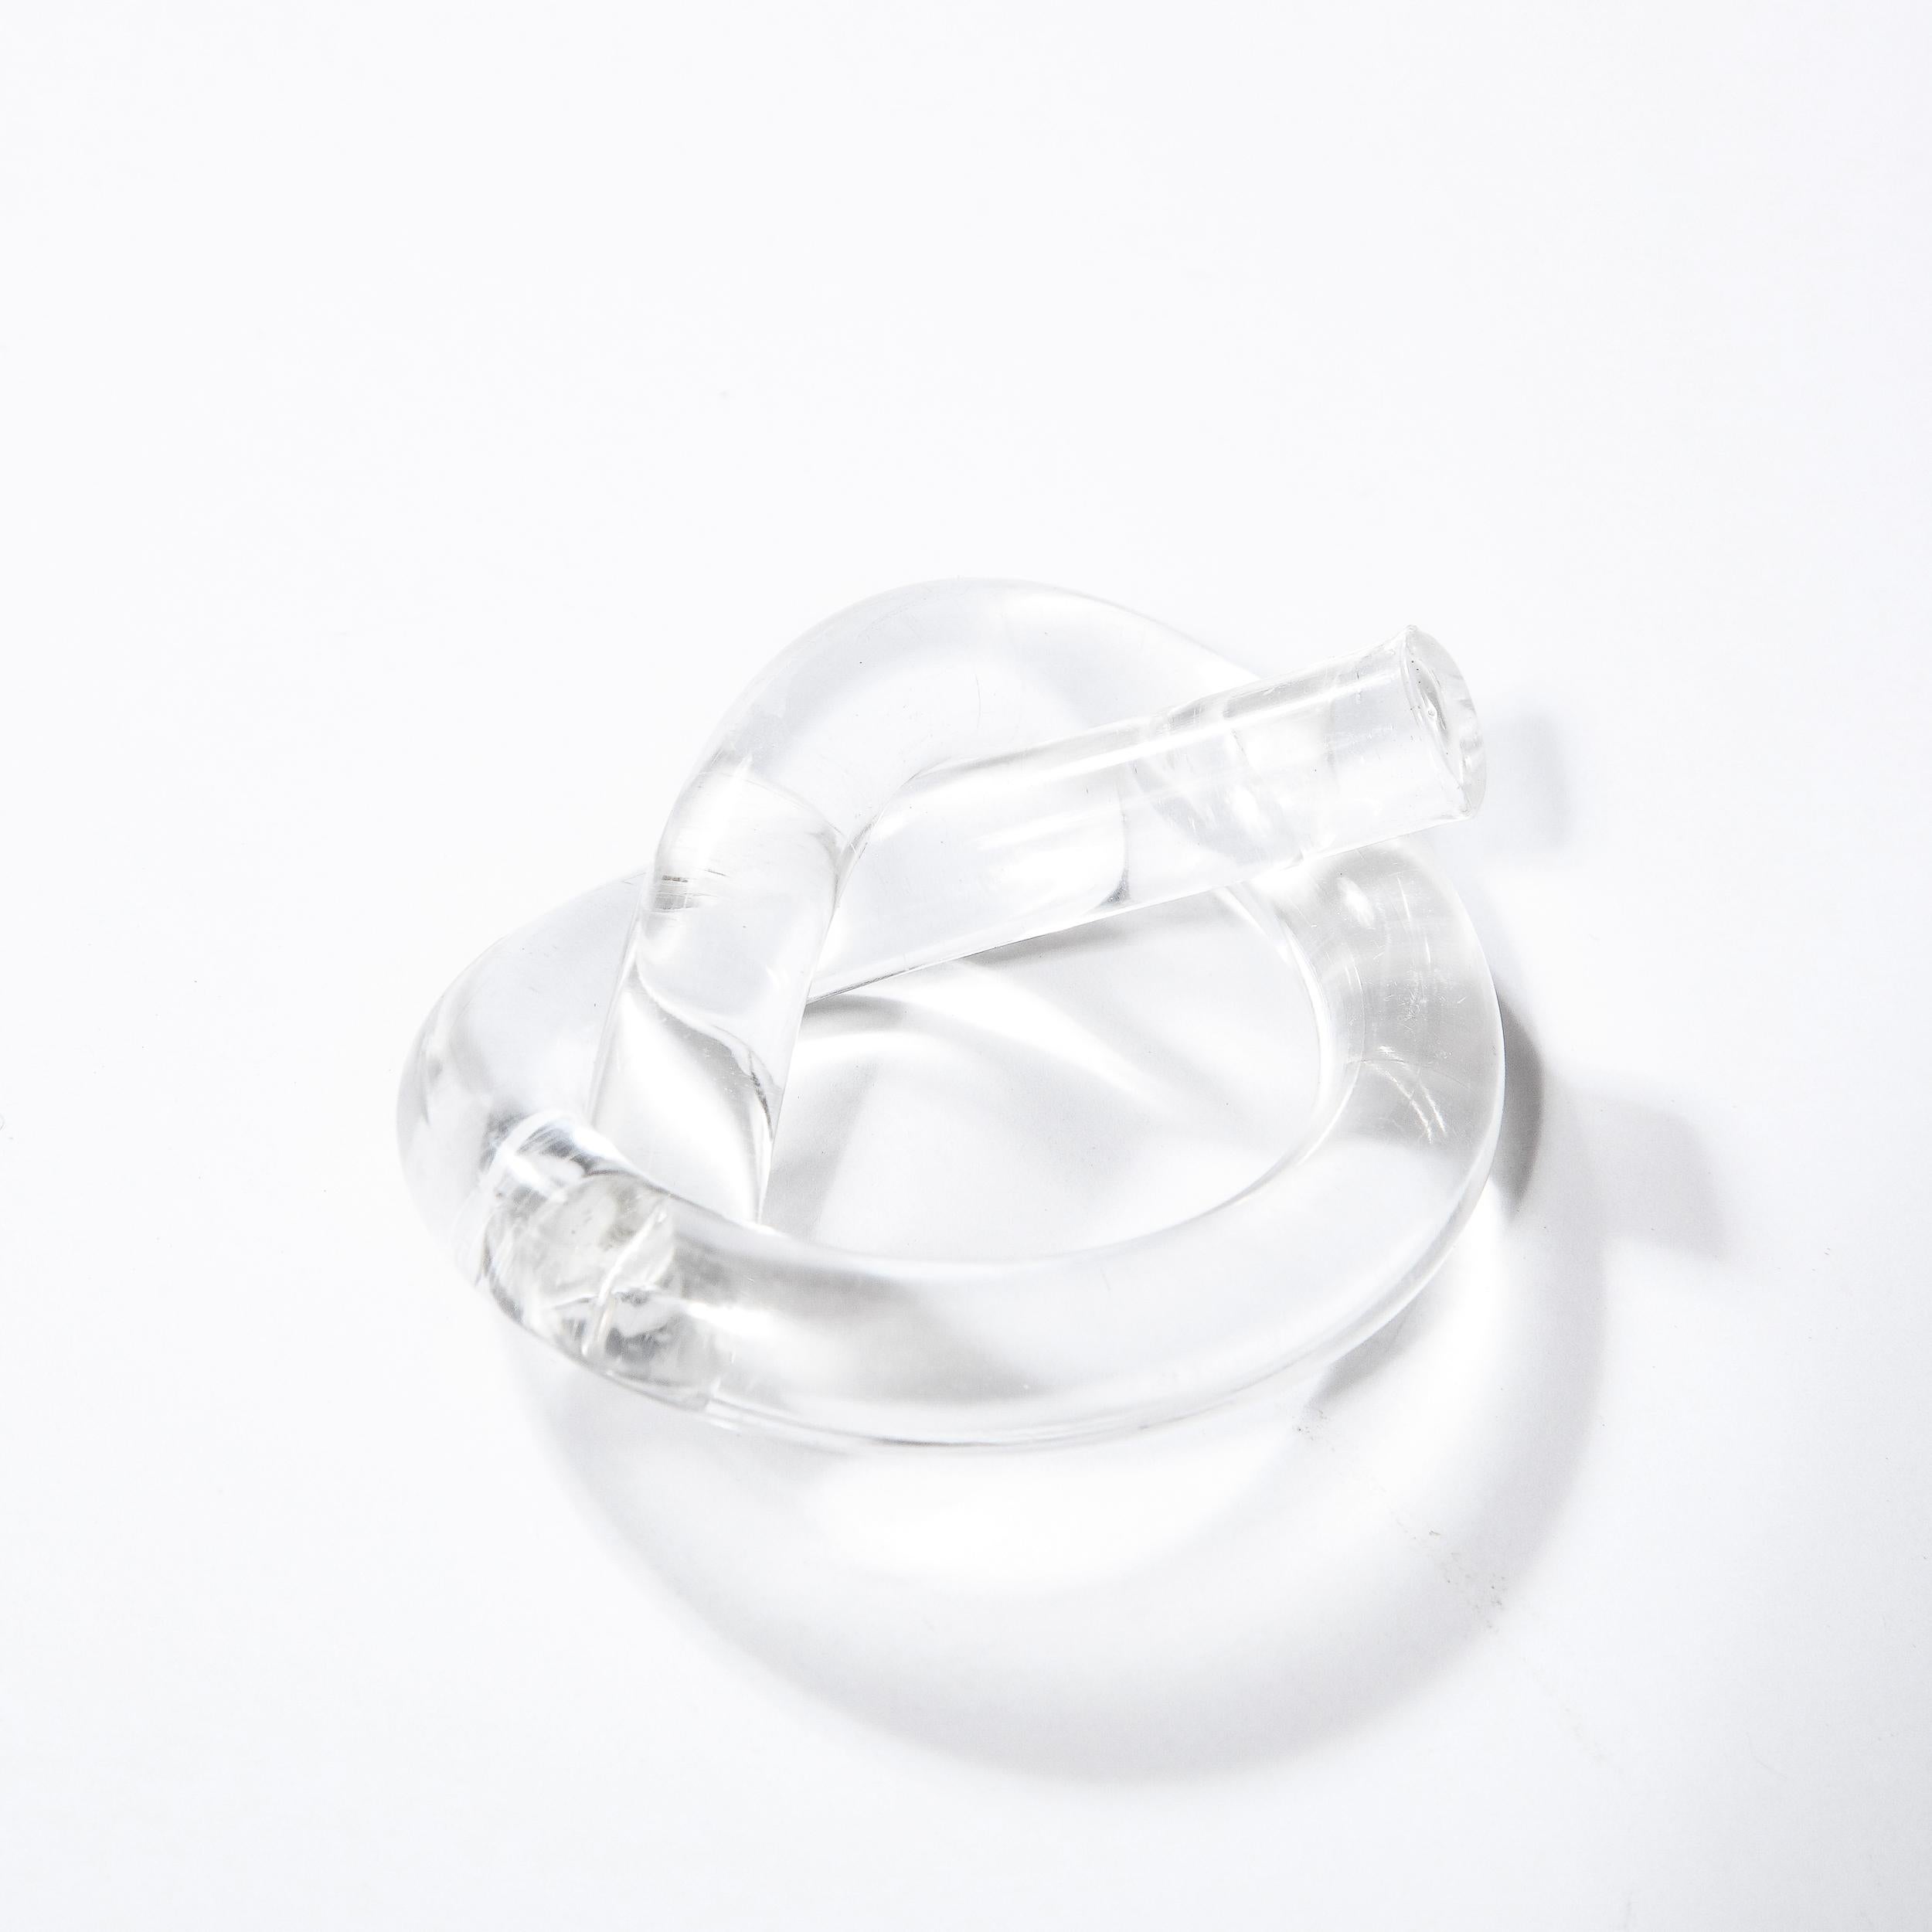 Mid-20th Century Set of Eight Mid-Century Modern Lucite Pretzel Napkin Rings by Dorothy Thorpe